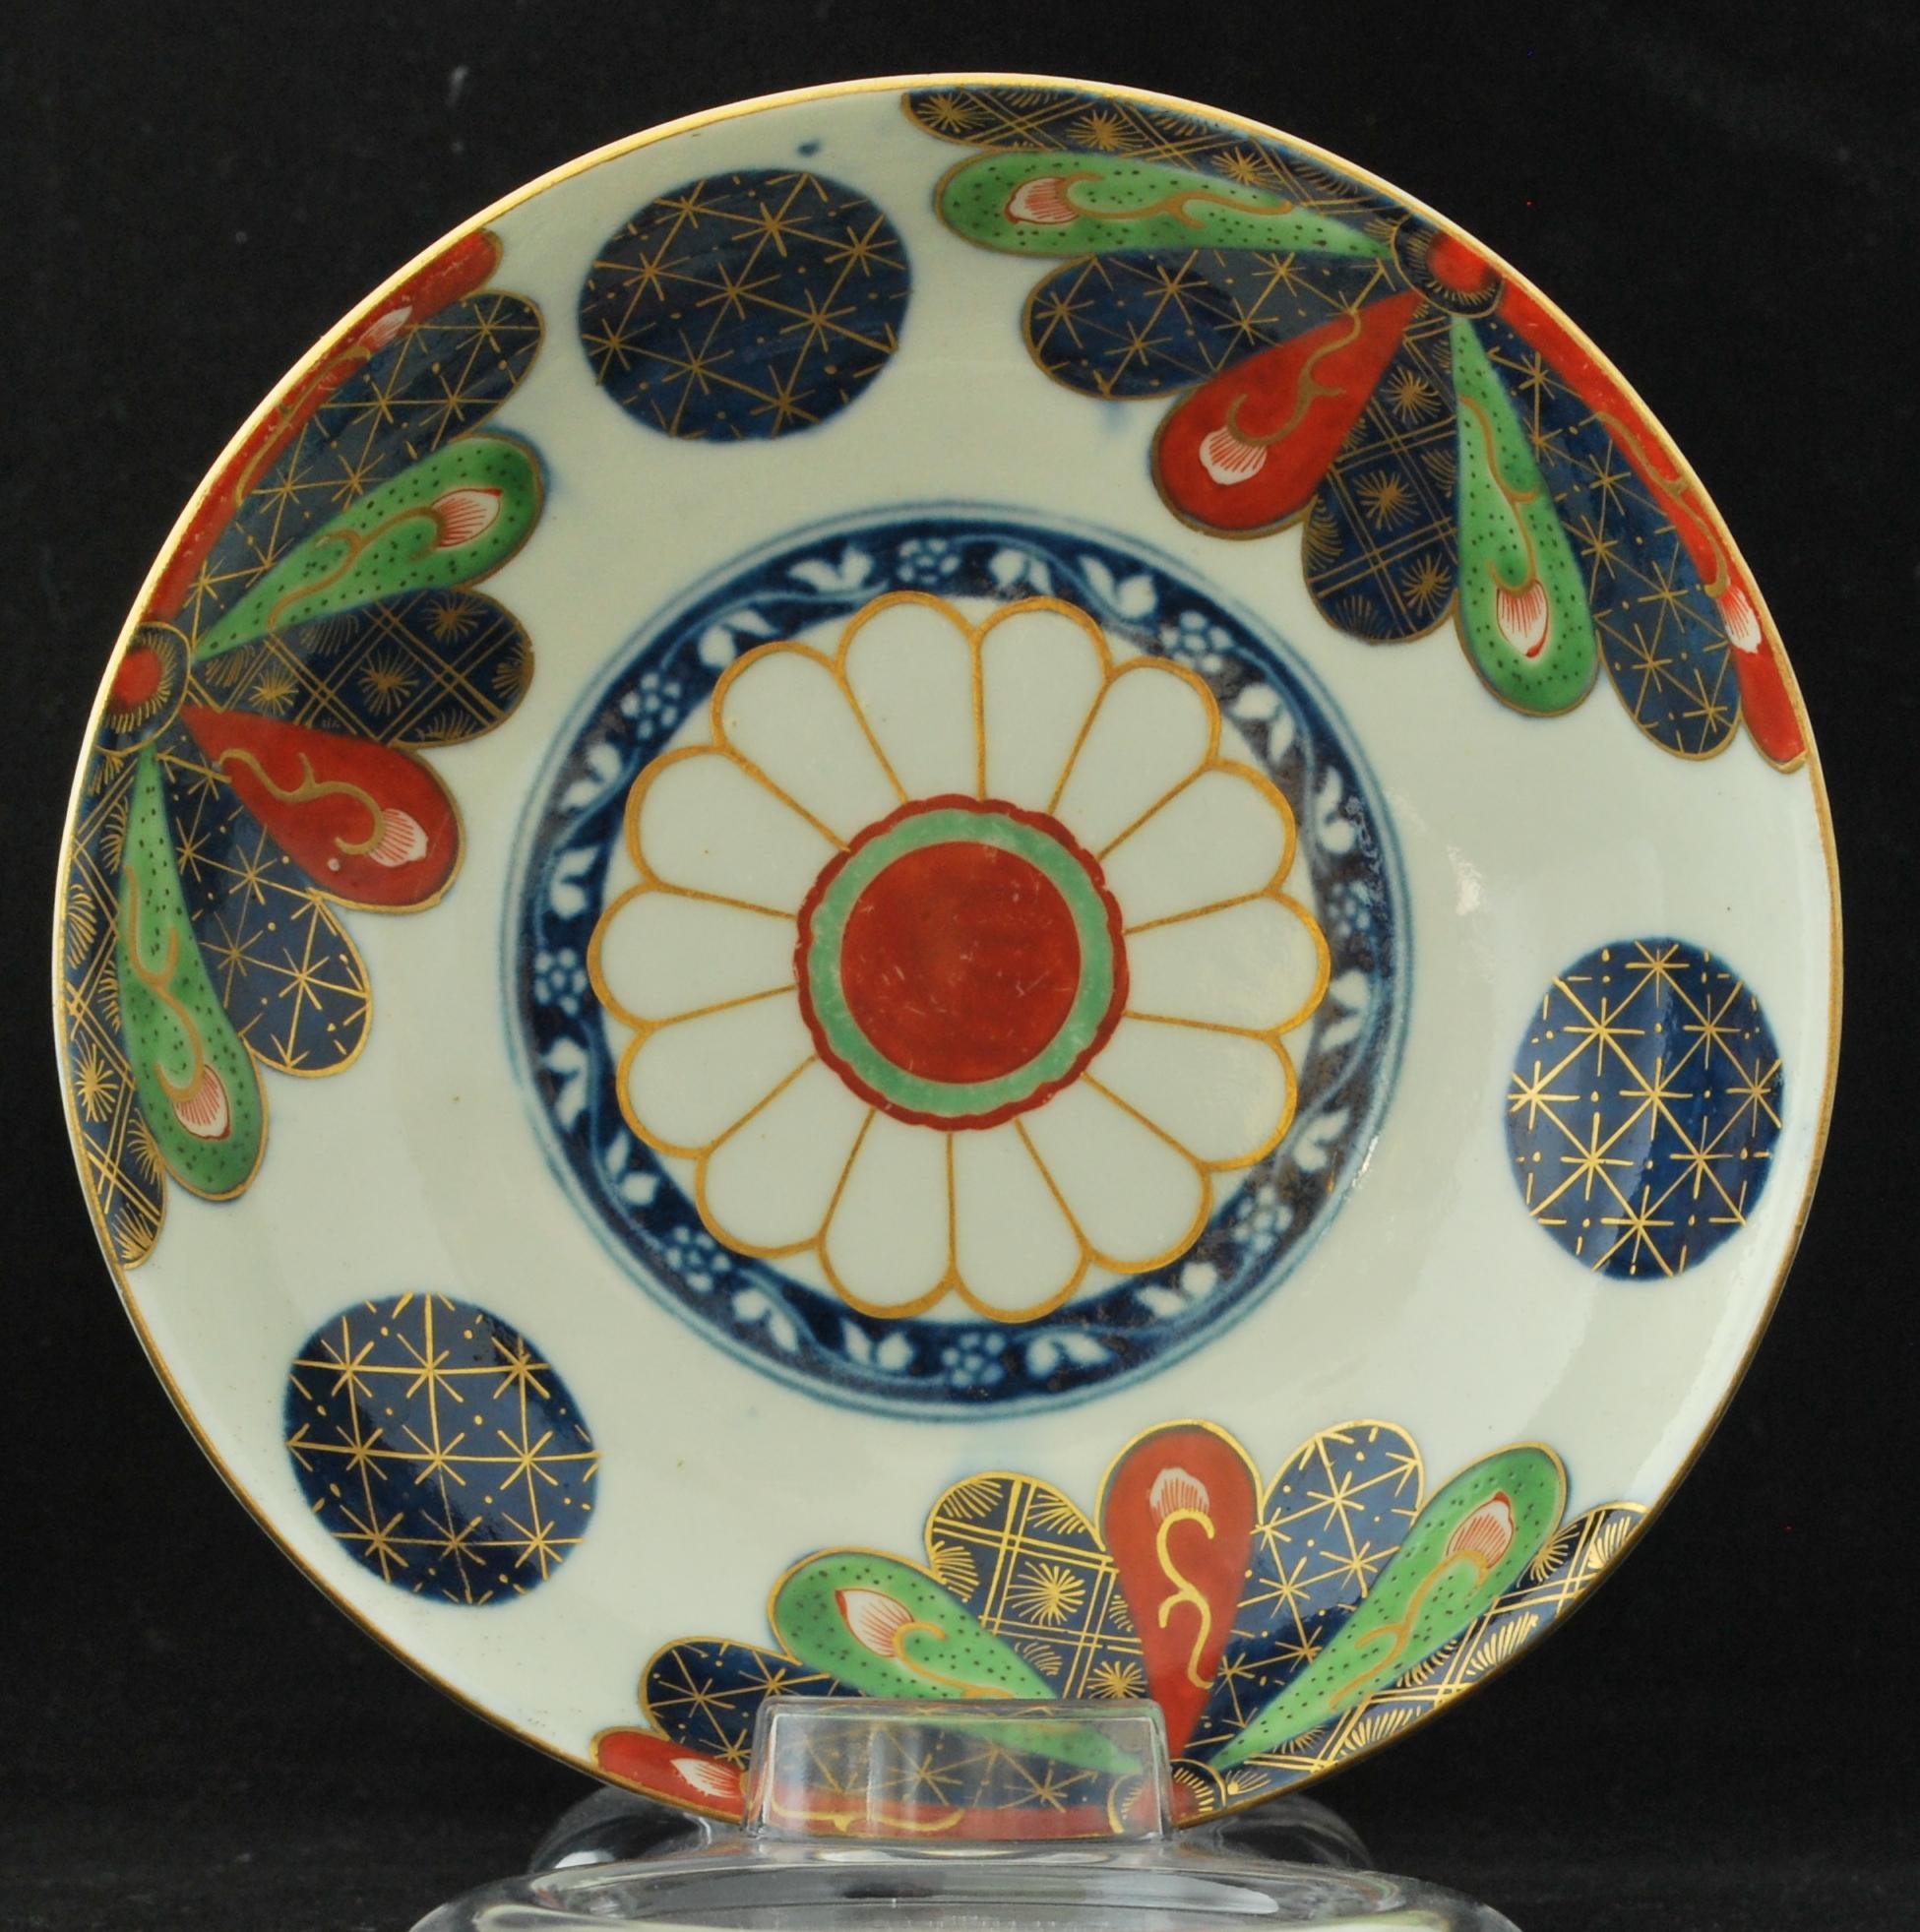 Tea bowl and saucer, decorated with the fan pattern, after a Japanese original. A striking effect.